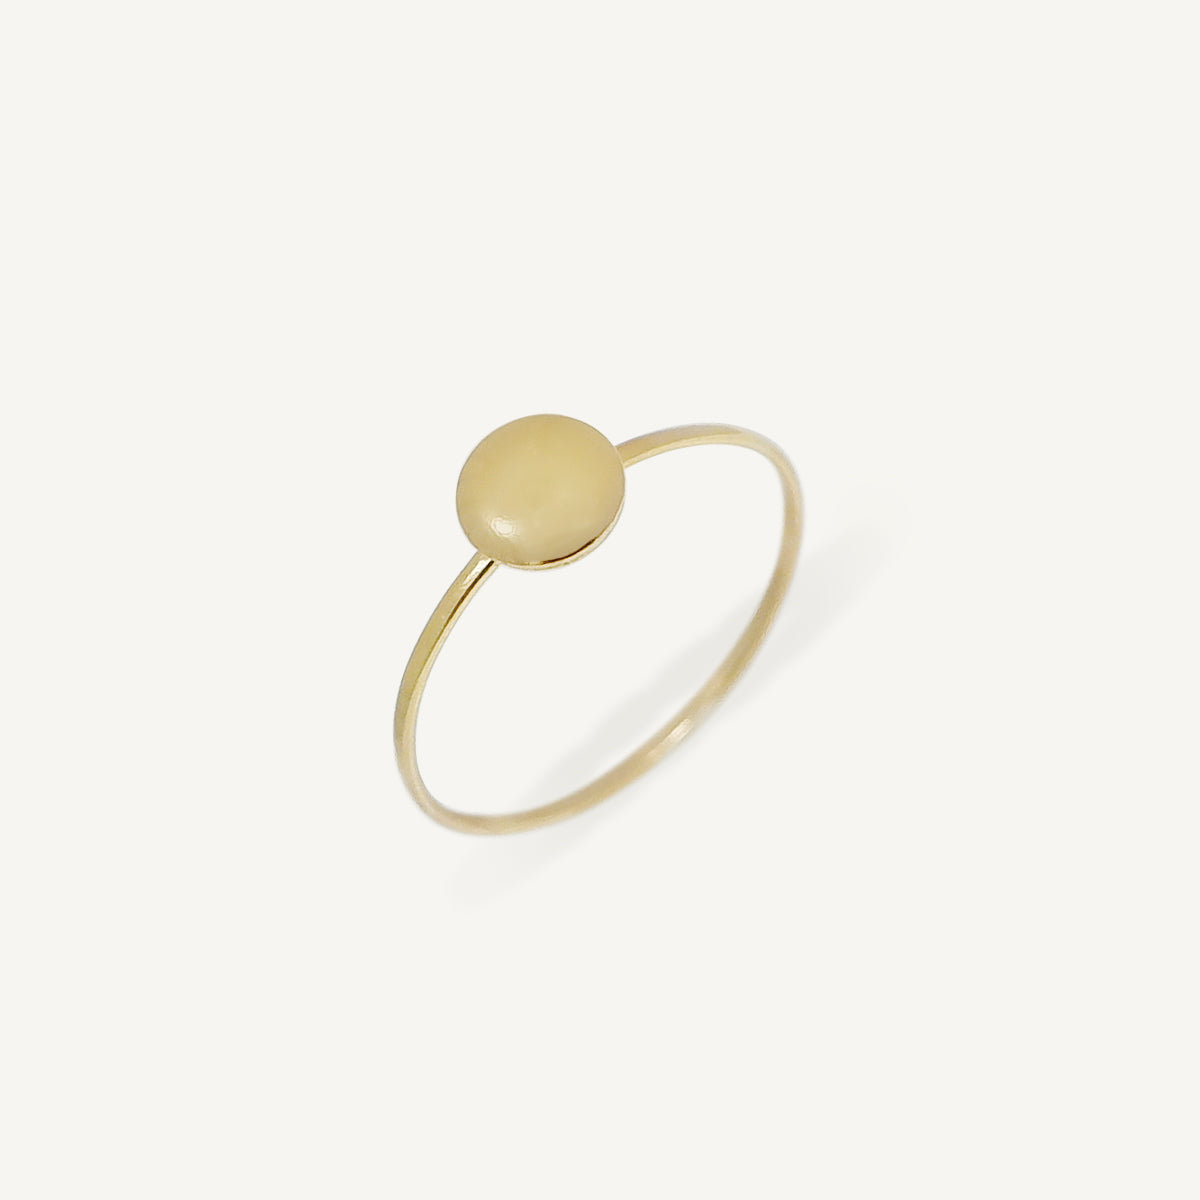 The Bubble Disc Ring in Solid Gold